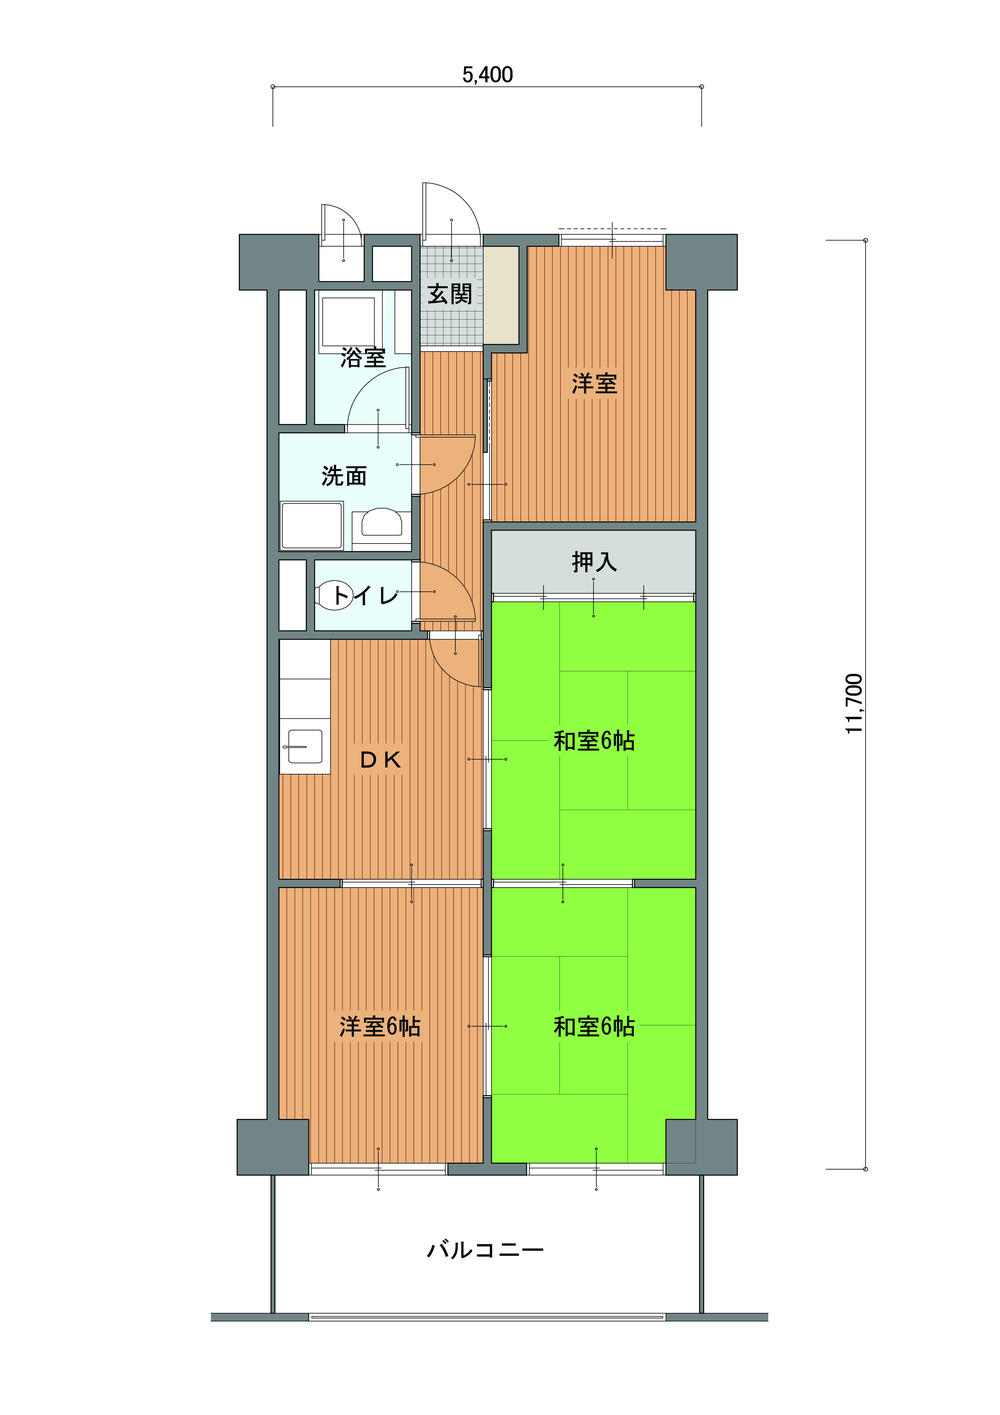 Floor plan. 4DK, Price 8.8 million yen, Occupied area 63.18 sq m , It can balcony area 8.1 sq m 4DK Feel free to renovation. Reform plan we have will be available.